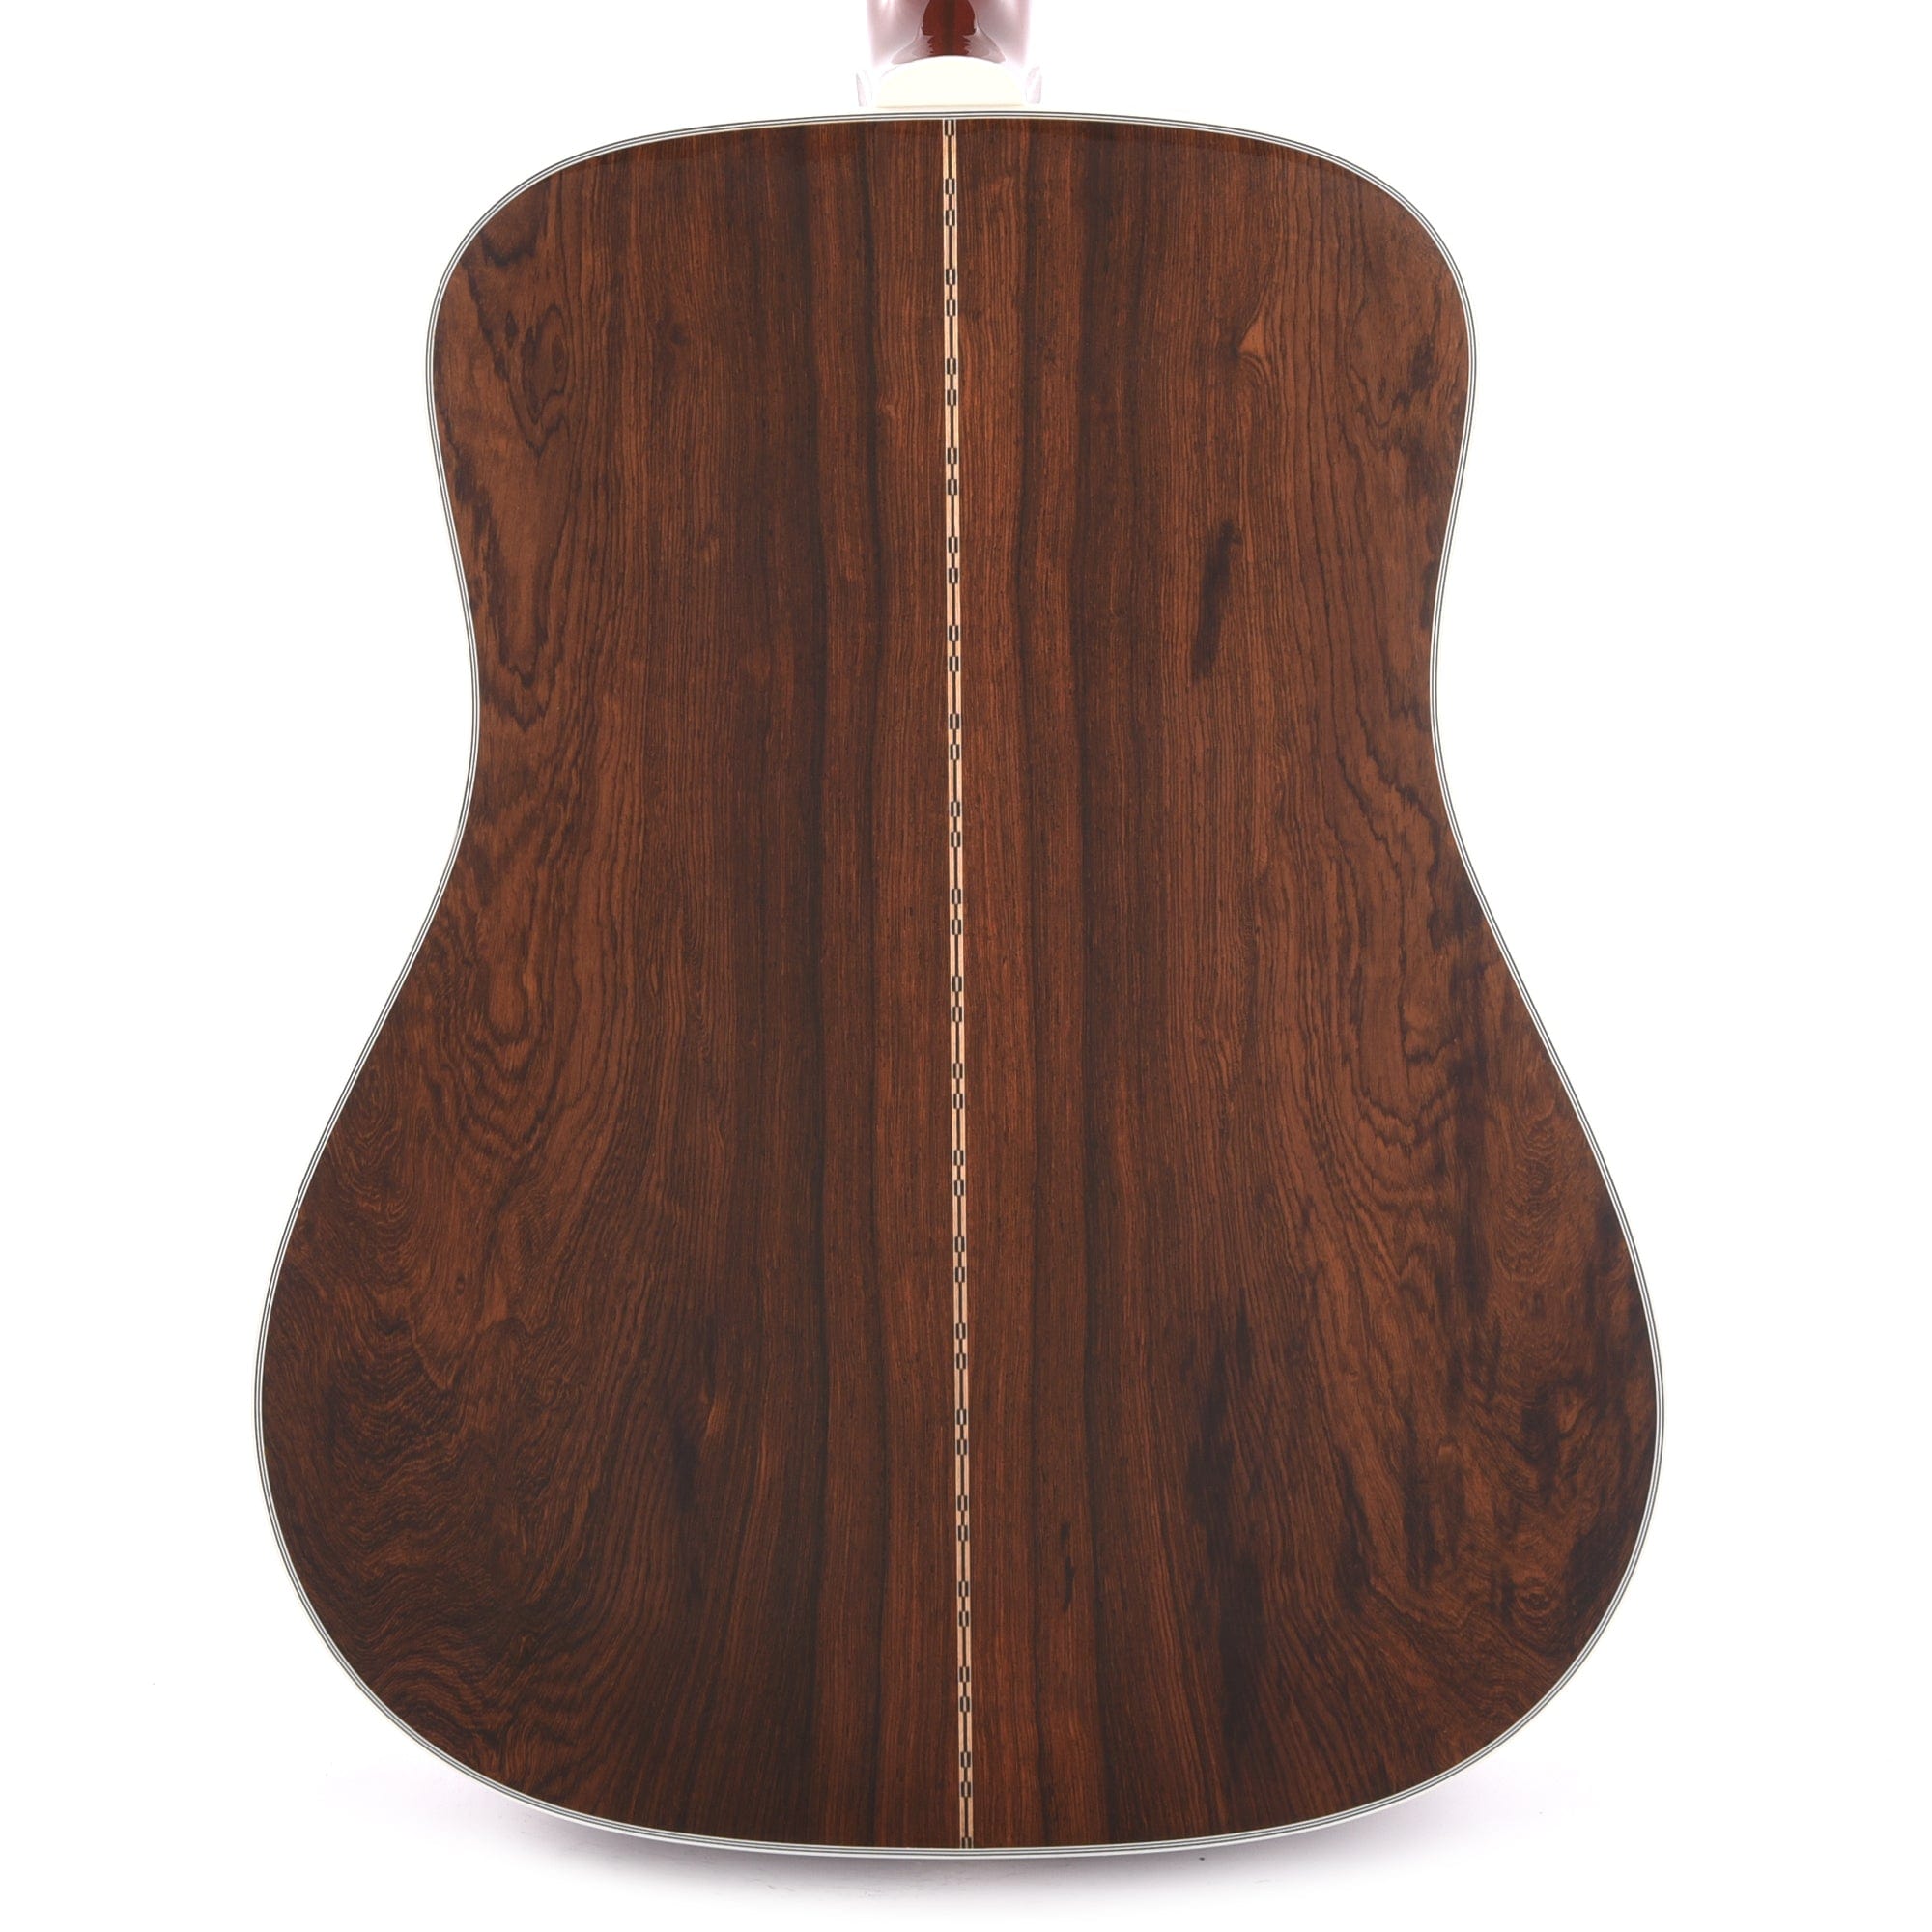 Guild USA Special Run D-55 70th Anniversary Limited Edition of 70 Acoustic Guitars / Dreadnought